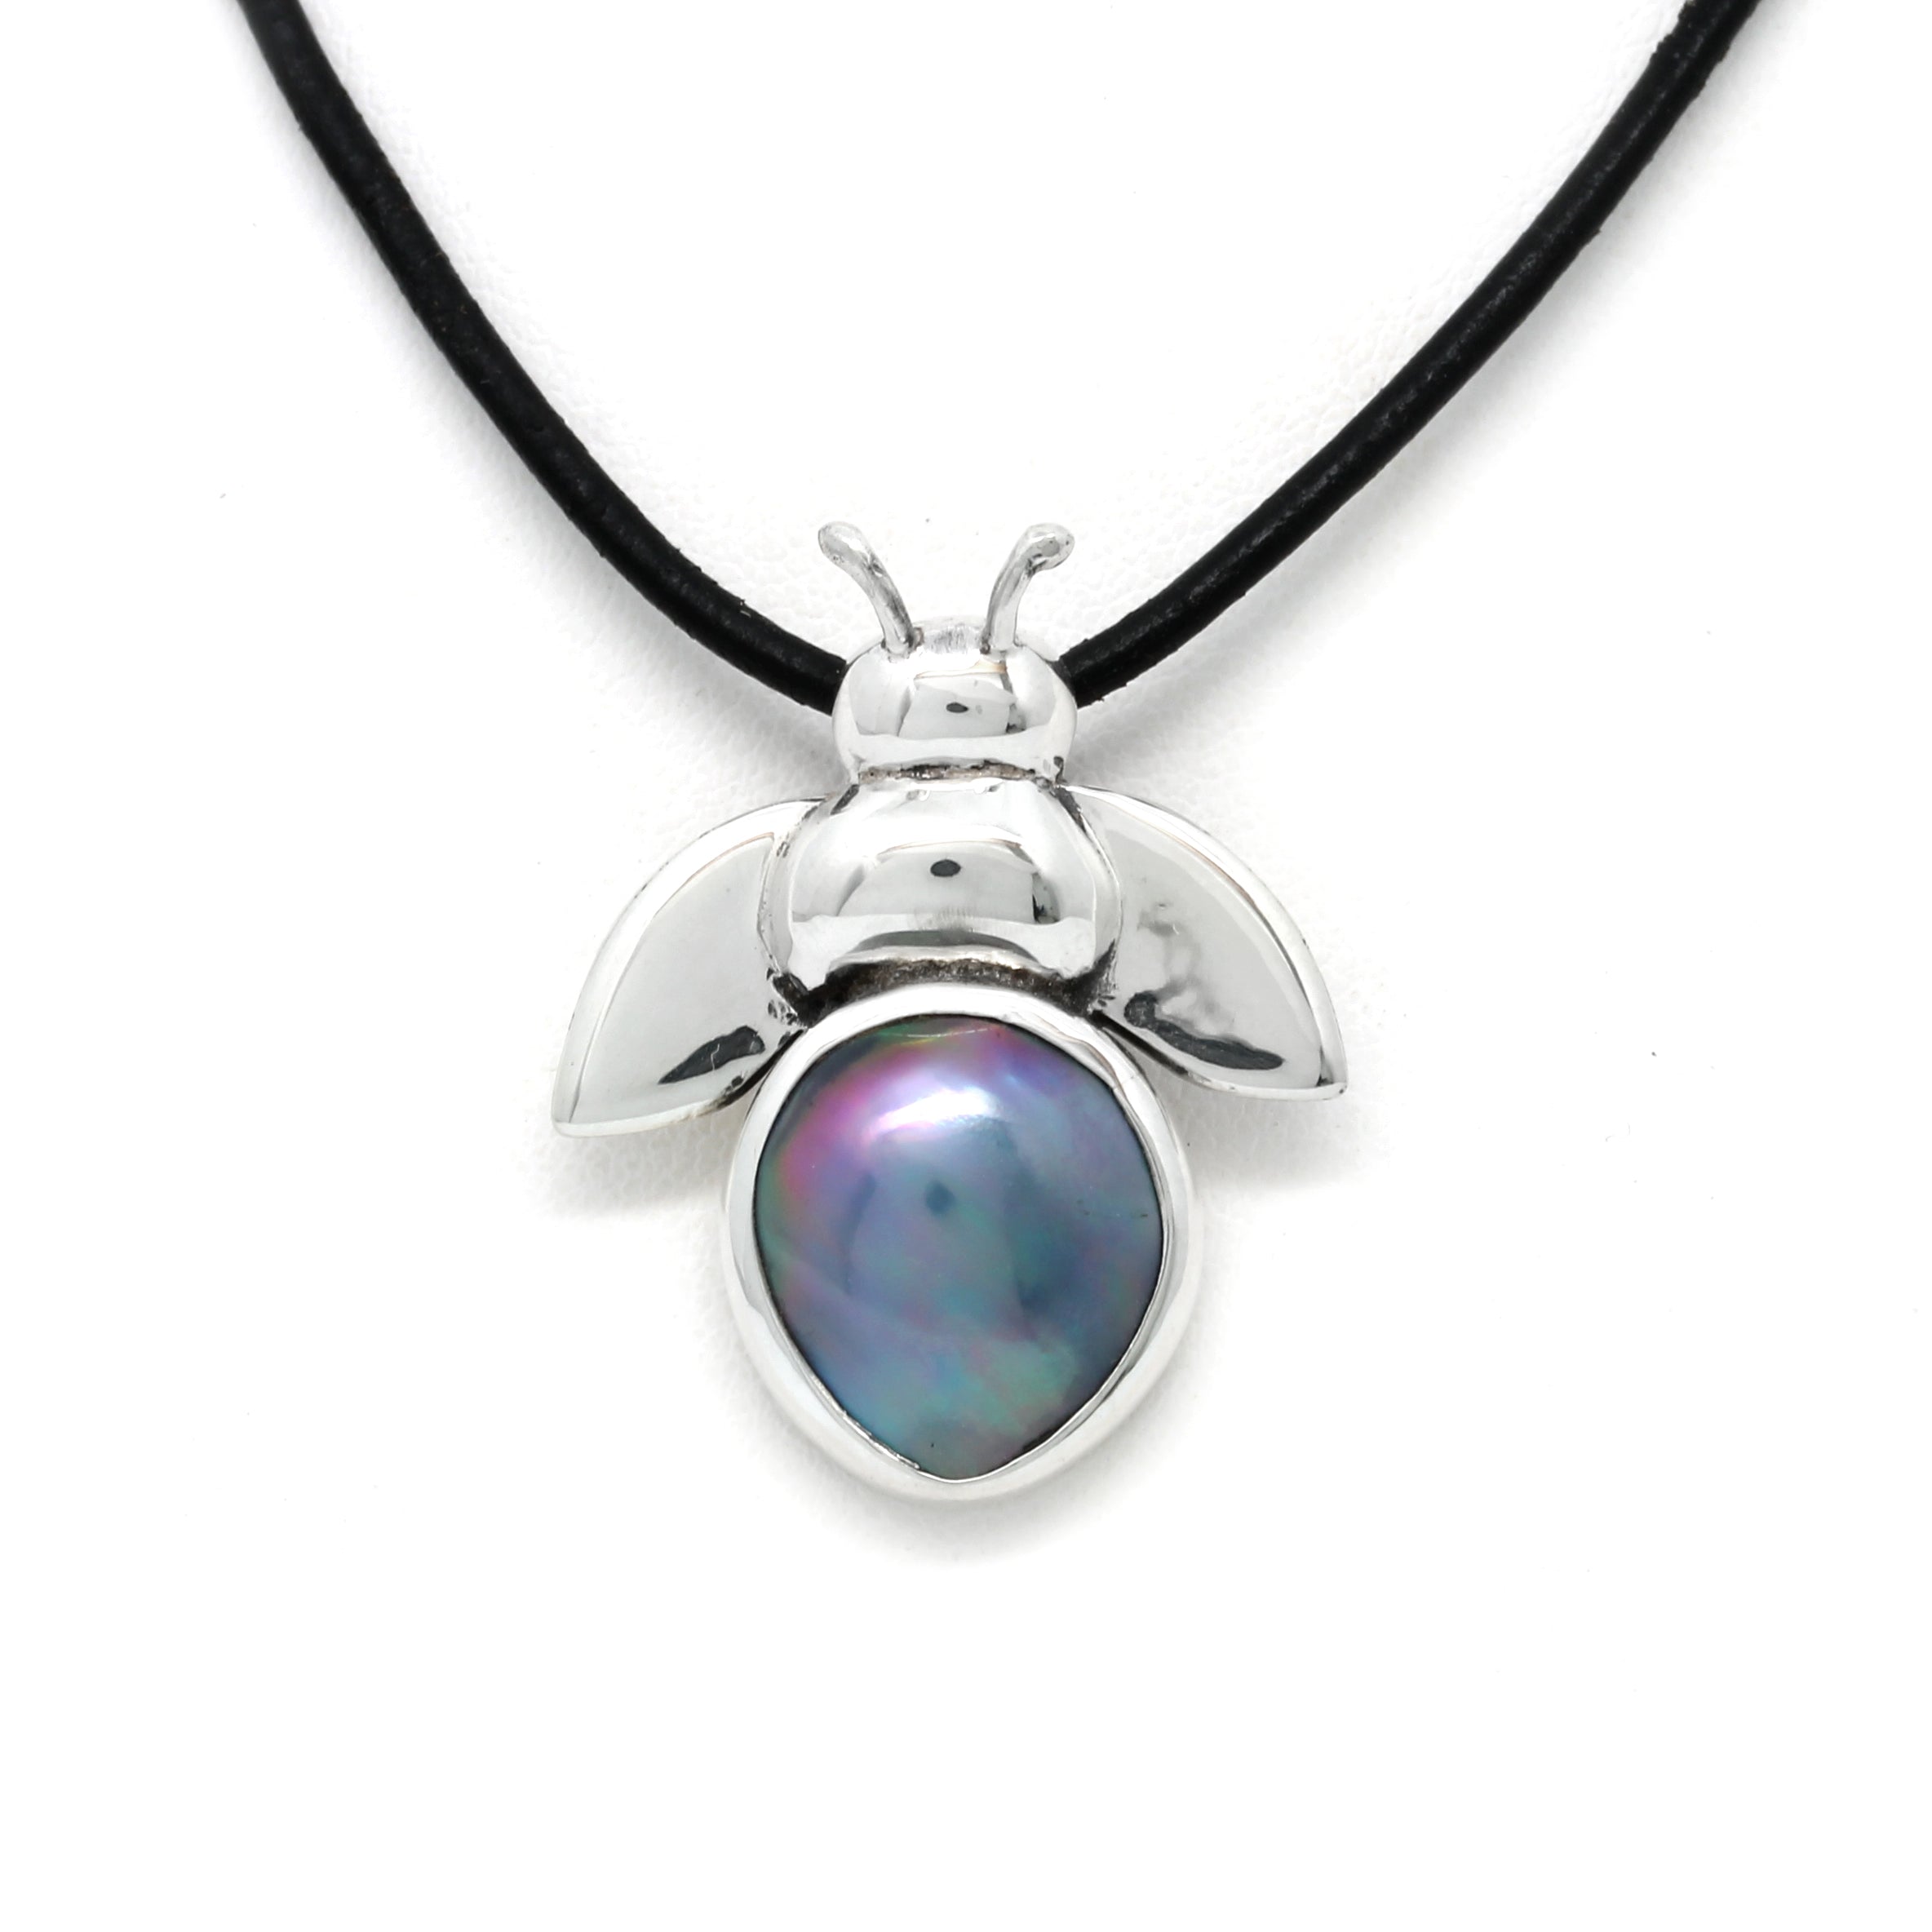 "Bee" Silver Pendant with Cortez Mabe Pearl by Priscila Canales